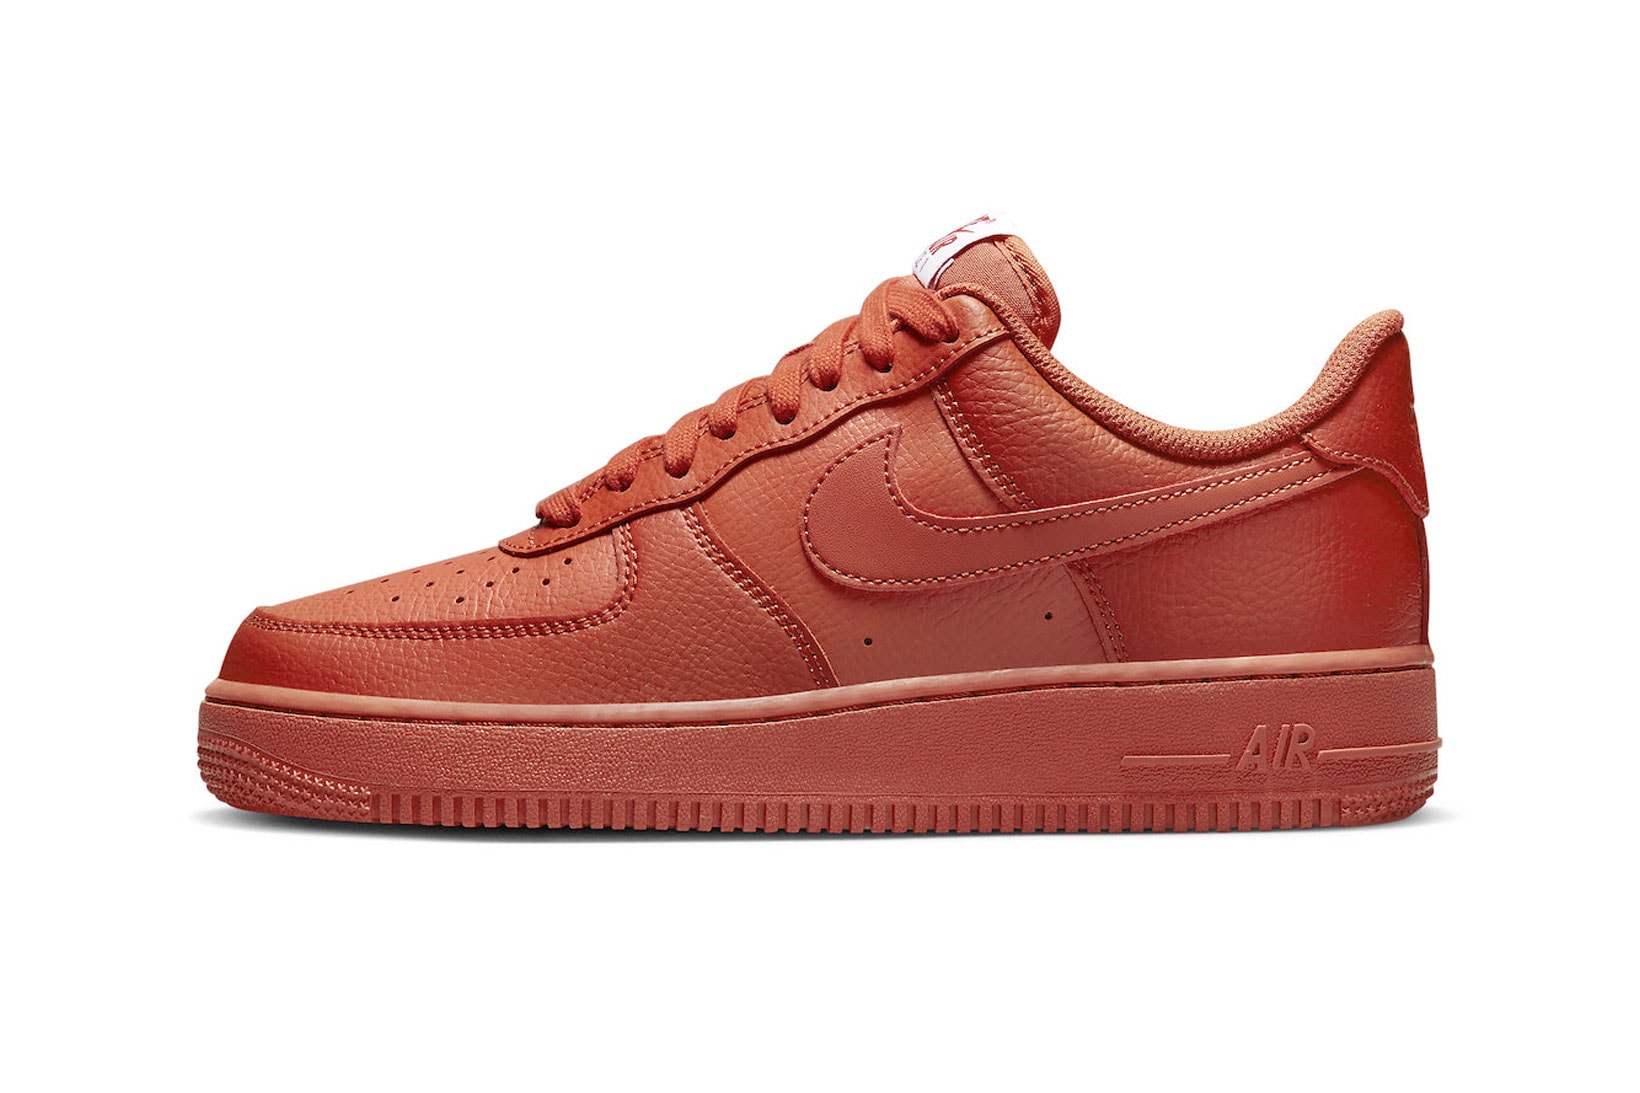 Orange Paisley Comes To The Nike Air Force 1 - Sneaker News